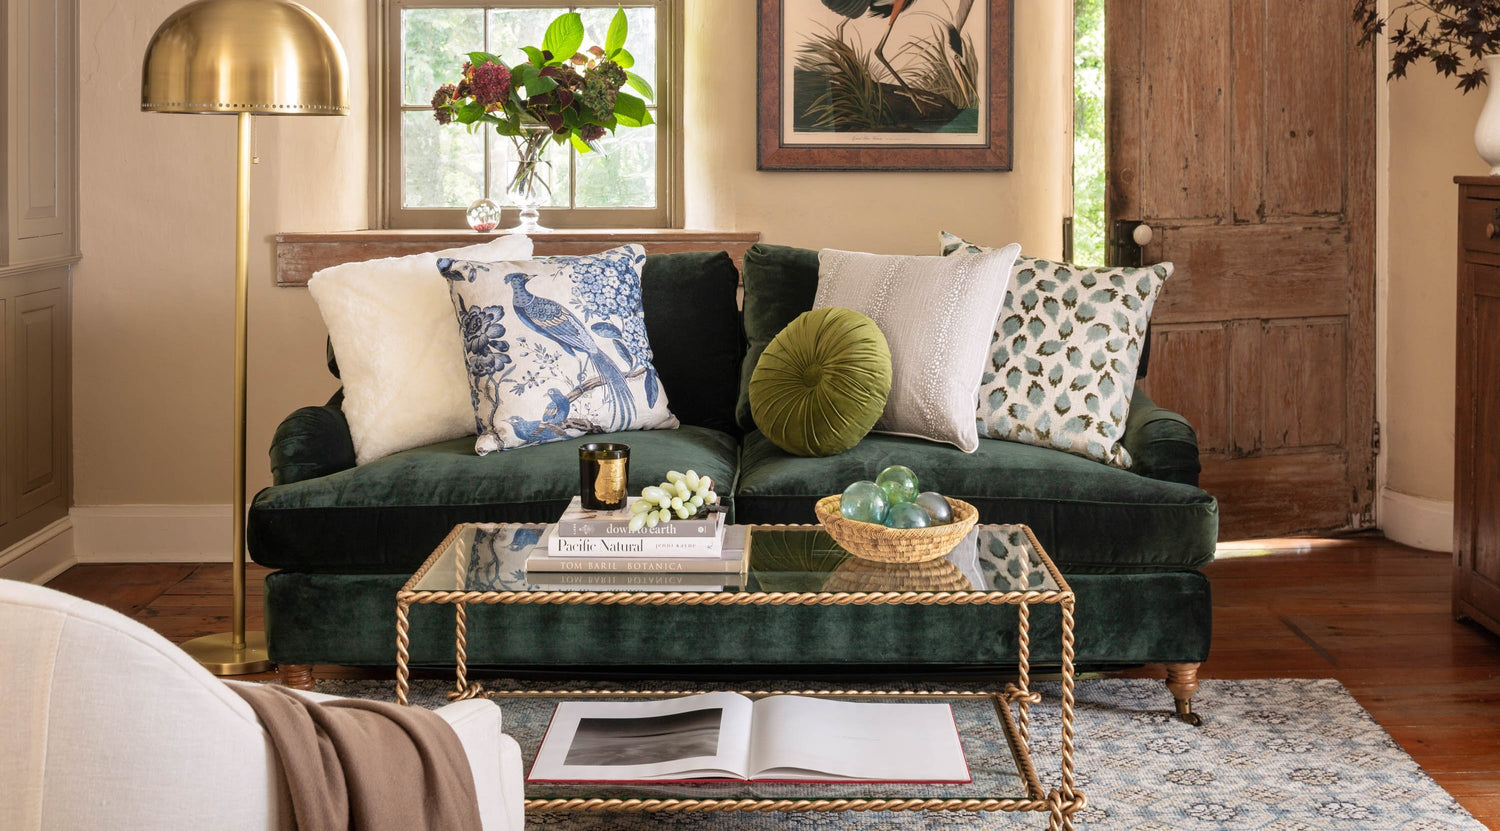 A cozy living room features a cushioned armchair with a green floral pattern, a dark green sofa with decorative pillows, and a wooden coffee table with a vase of pink flowers. Blue and white decorative plates adorn the wall, and a side table holds pastel flowers.